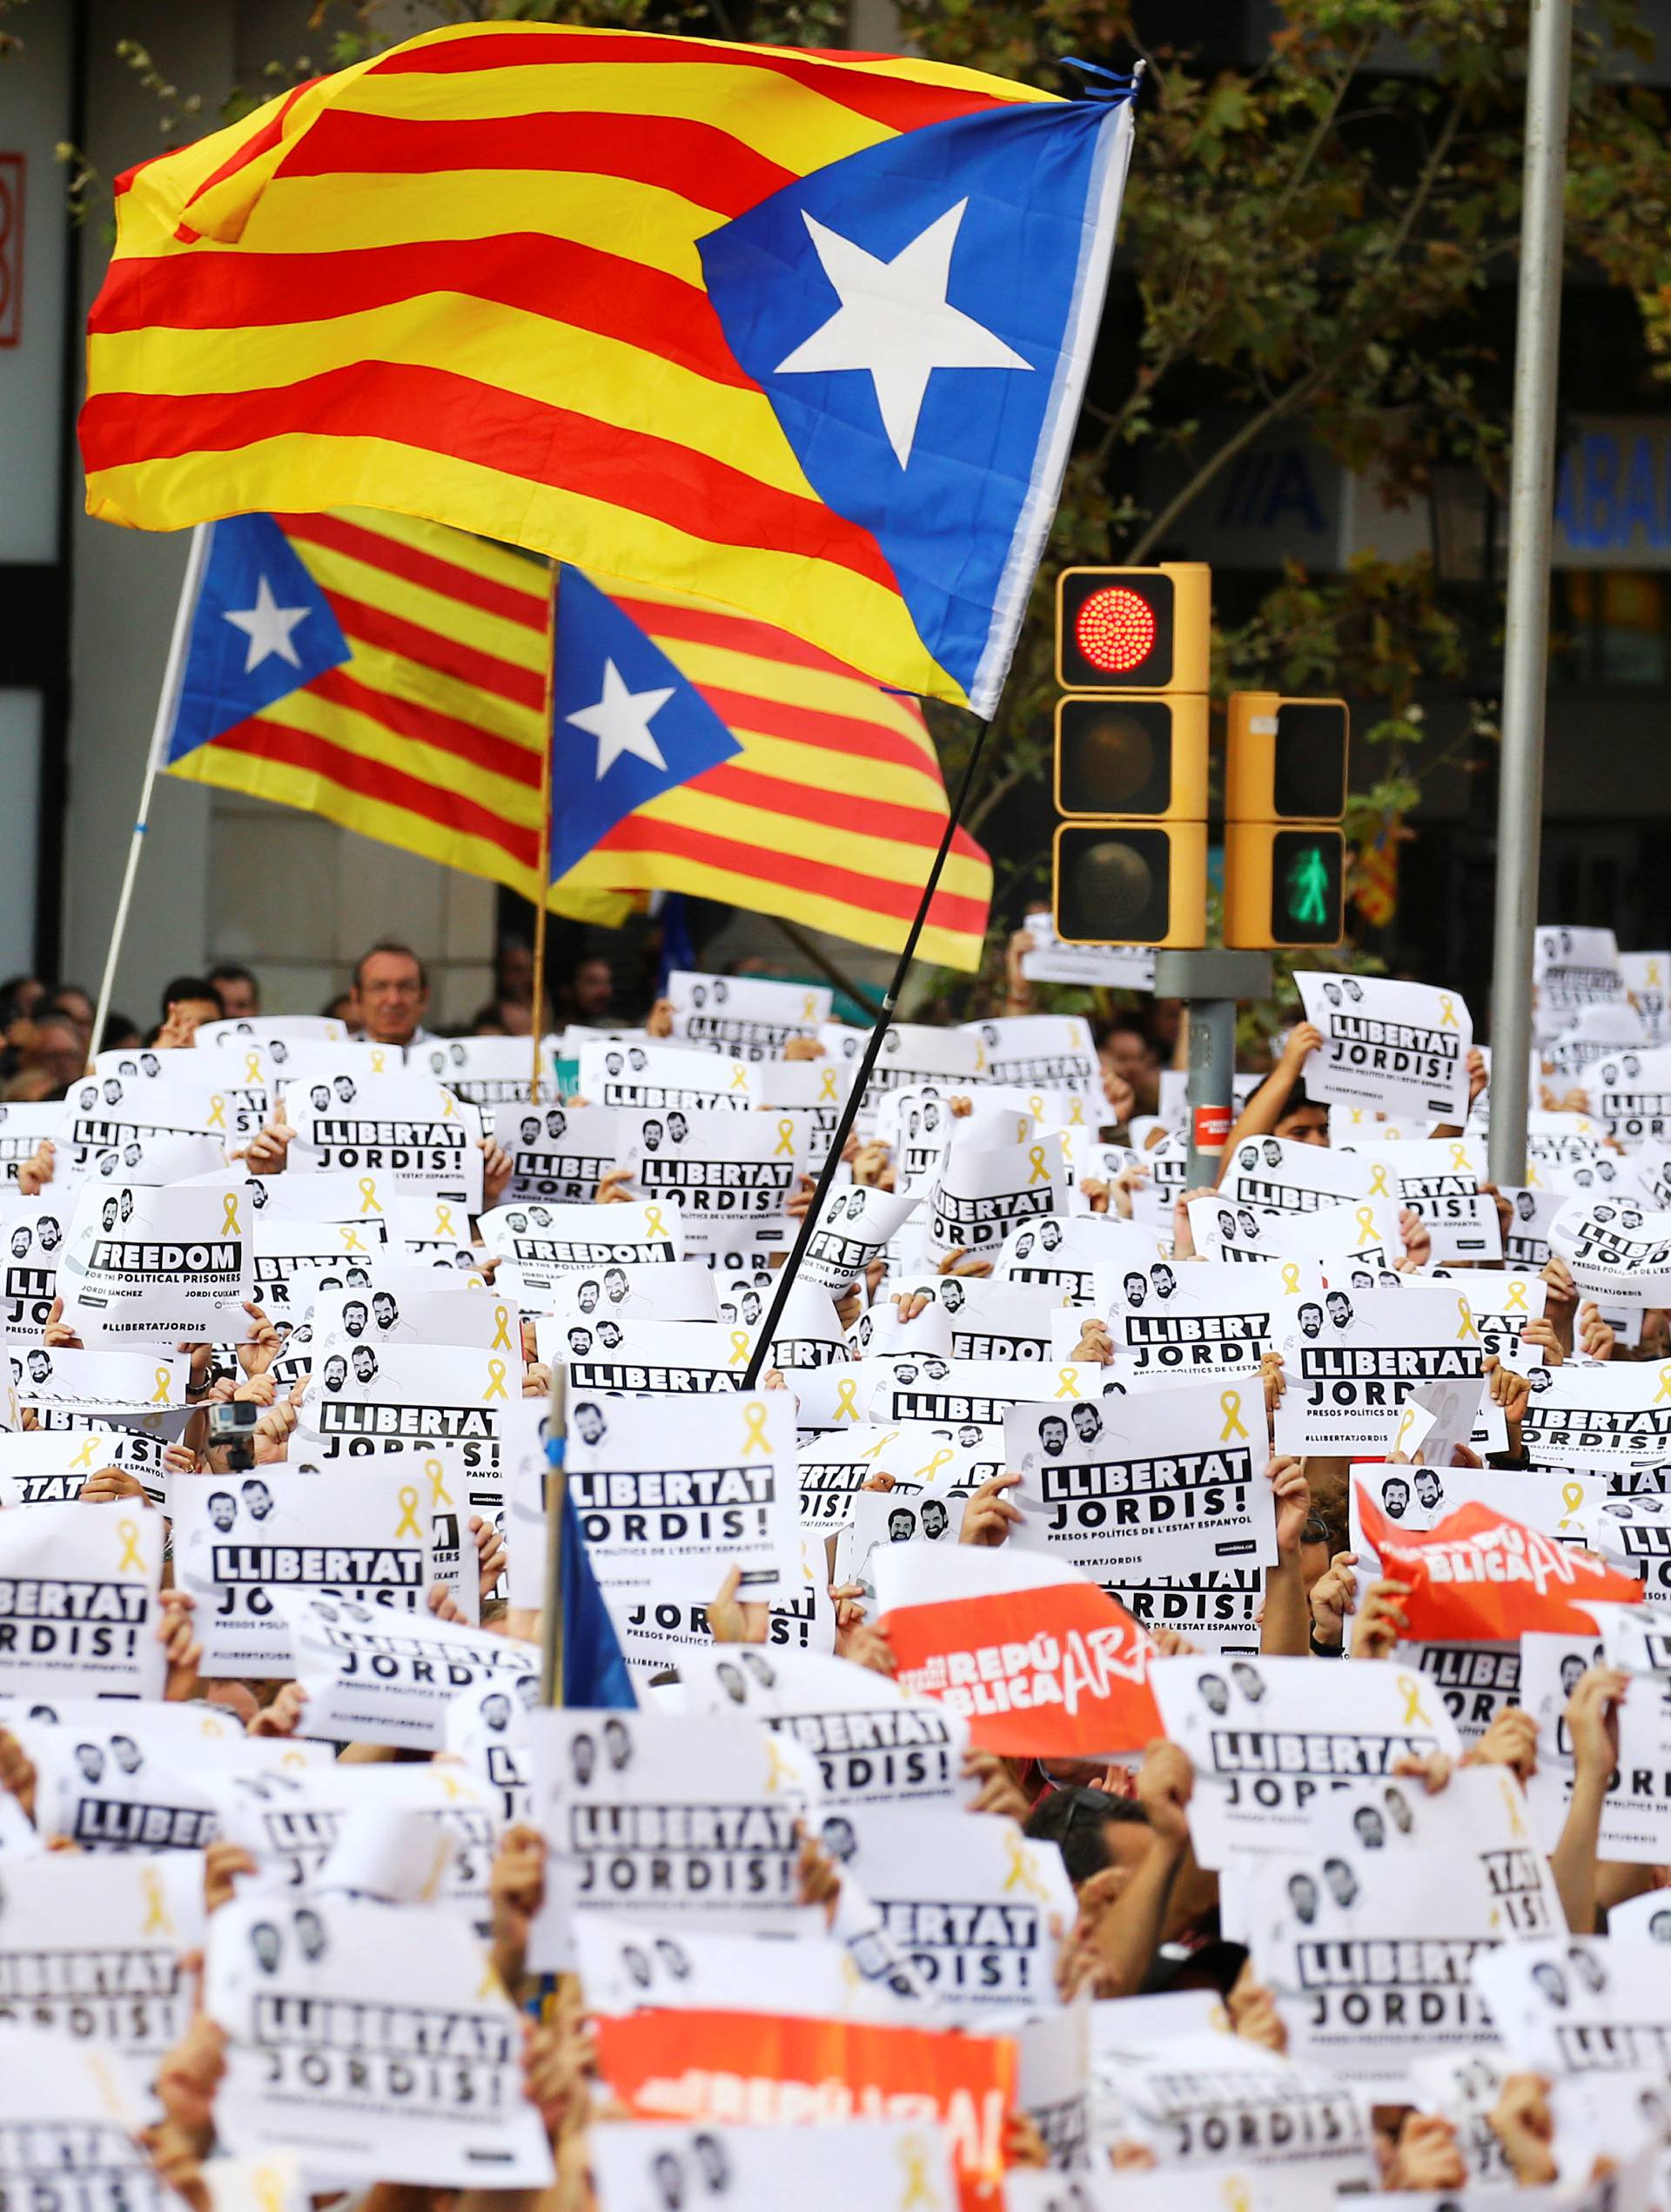 People wave placards which read "Freedom for the Jordis" in Catalan during a demonstration organised by Catalan pro-independence movements ANC (Catalan National Assembly) and Omnium Cutural, following the imprisonment of their two leaders in Barcelona